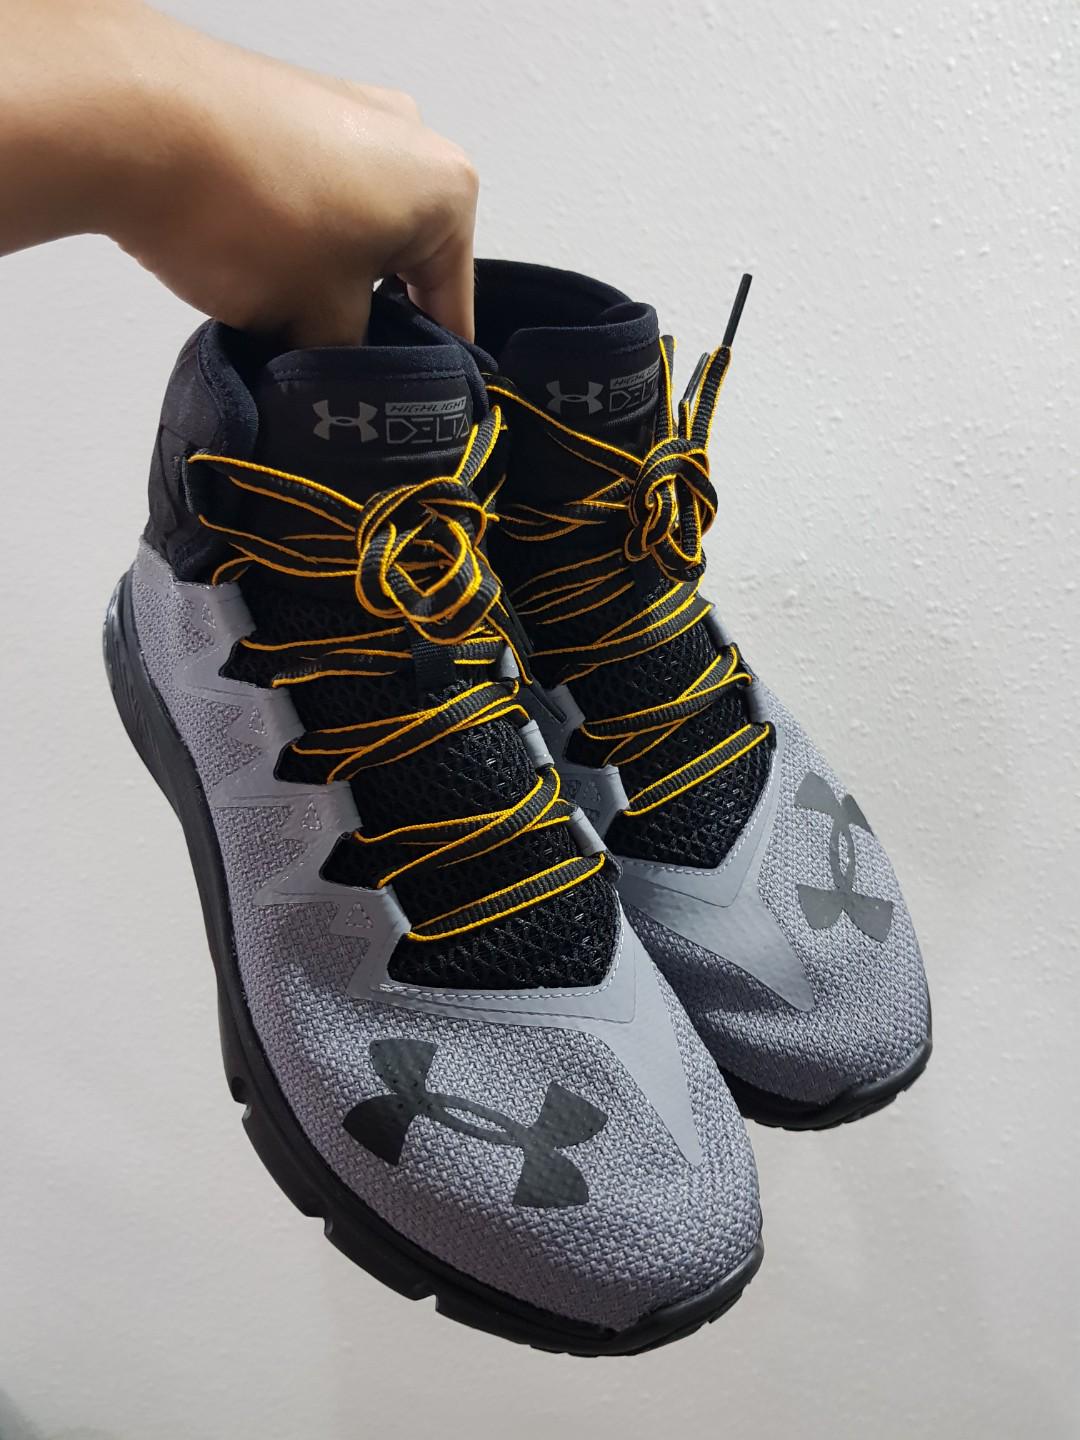 project rock delta by under armour